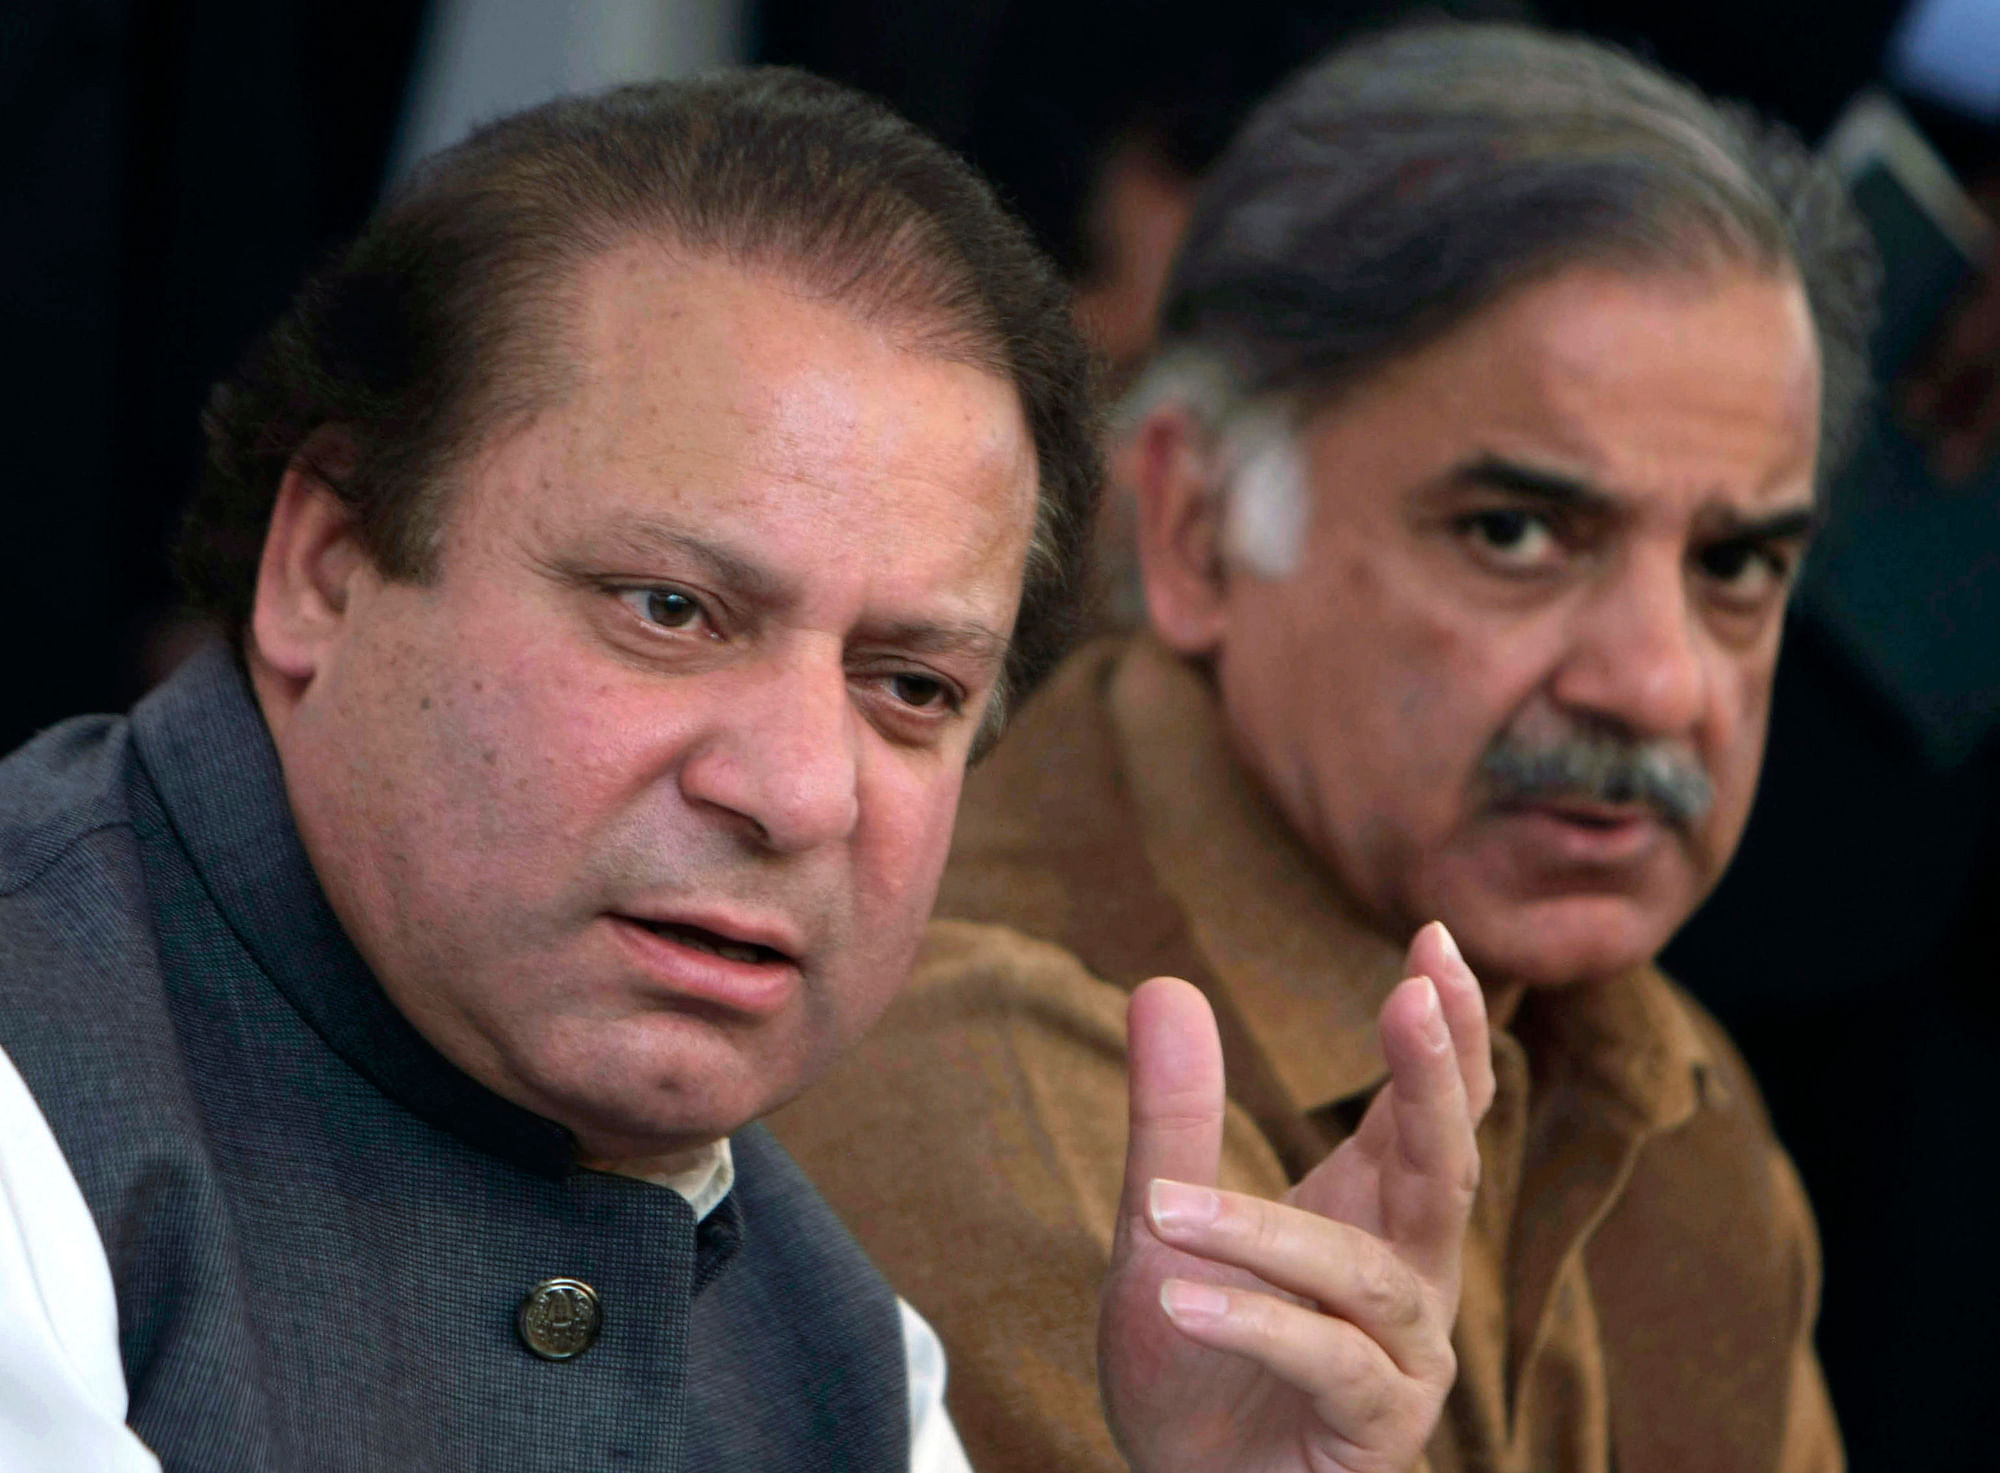 <div class="paragraphs"><p>File photo of Pakistan’s deposed Prime Minister Nawaz Sharif, left, addressing a news conference with his brother Shahbaz Sharif in Lahore, Pakistan.</p></div>